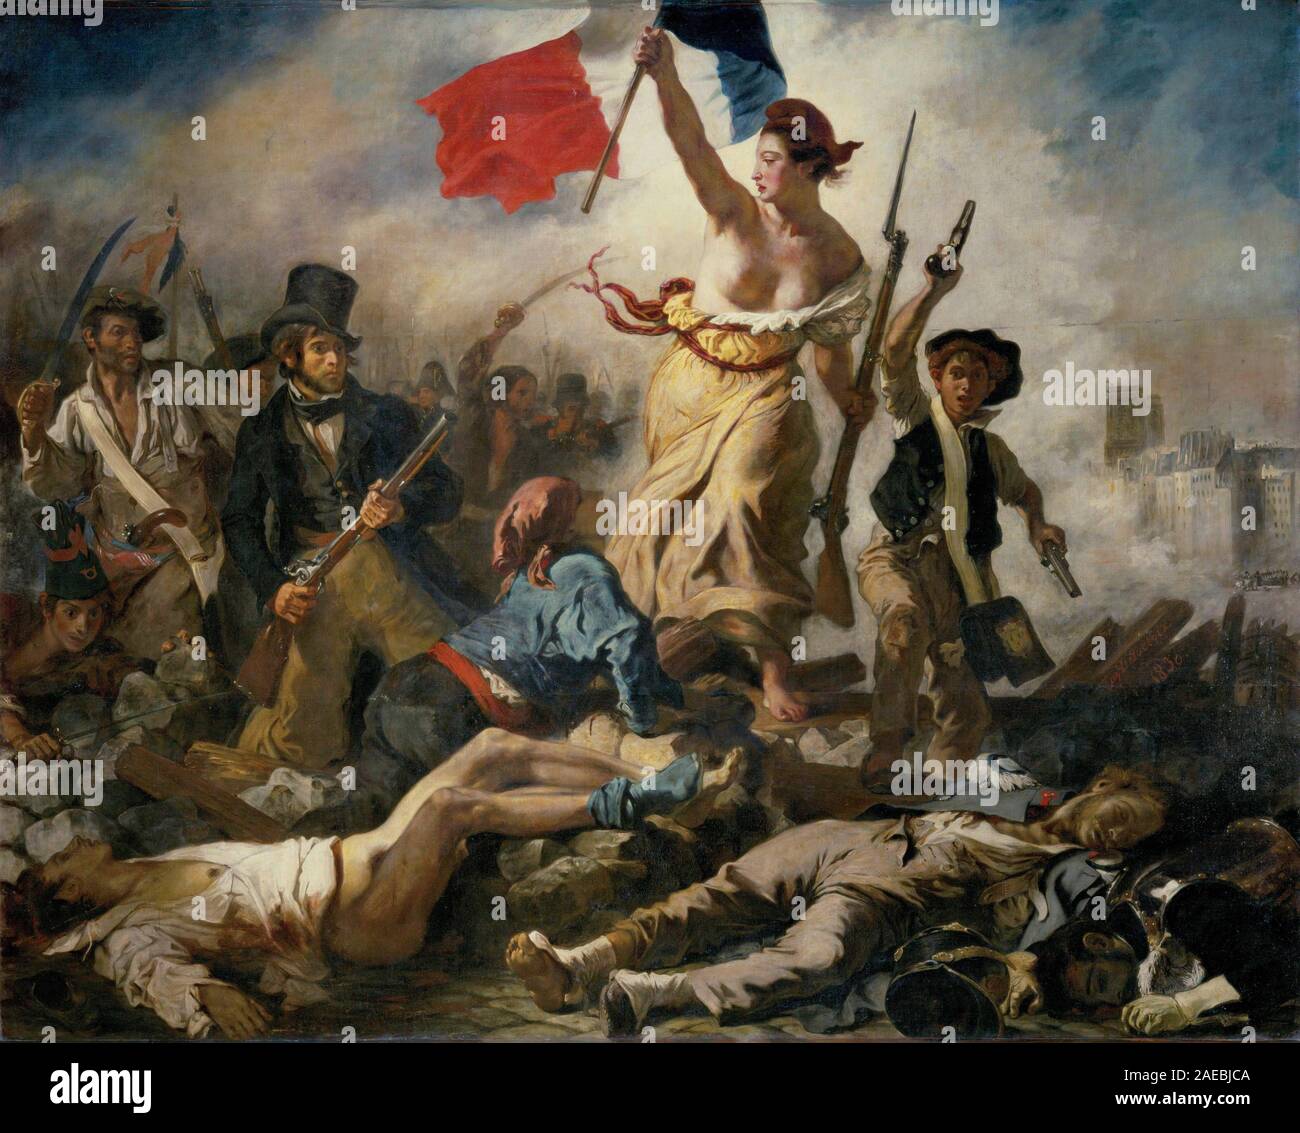 Liberty leading the People, by Eugene Delacroix, 1830, oil on canvas Stock Photo